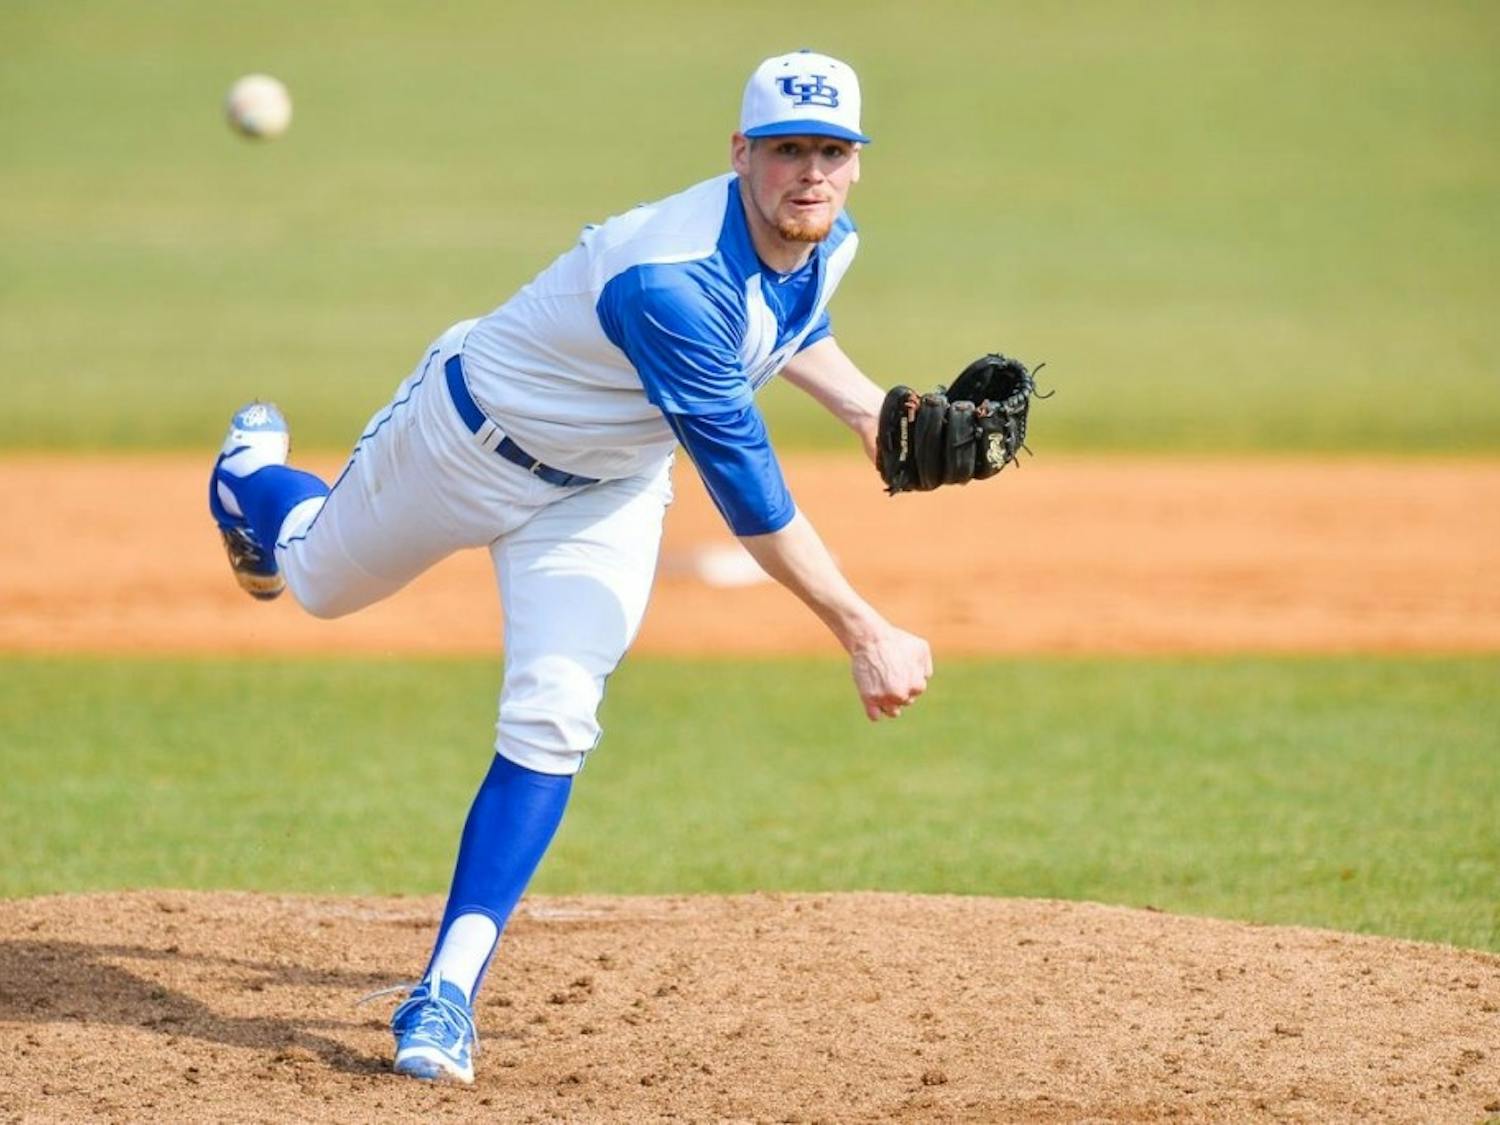 Sophomore pitcher Charlie Sobieraski throws a pitch. Sobieraski will leave UB to play baseball for Pittsburgh.&nbsp;